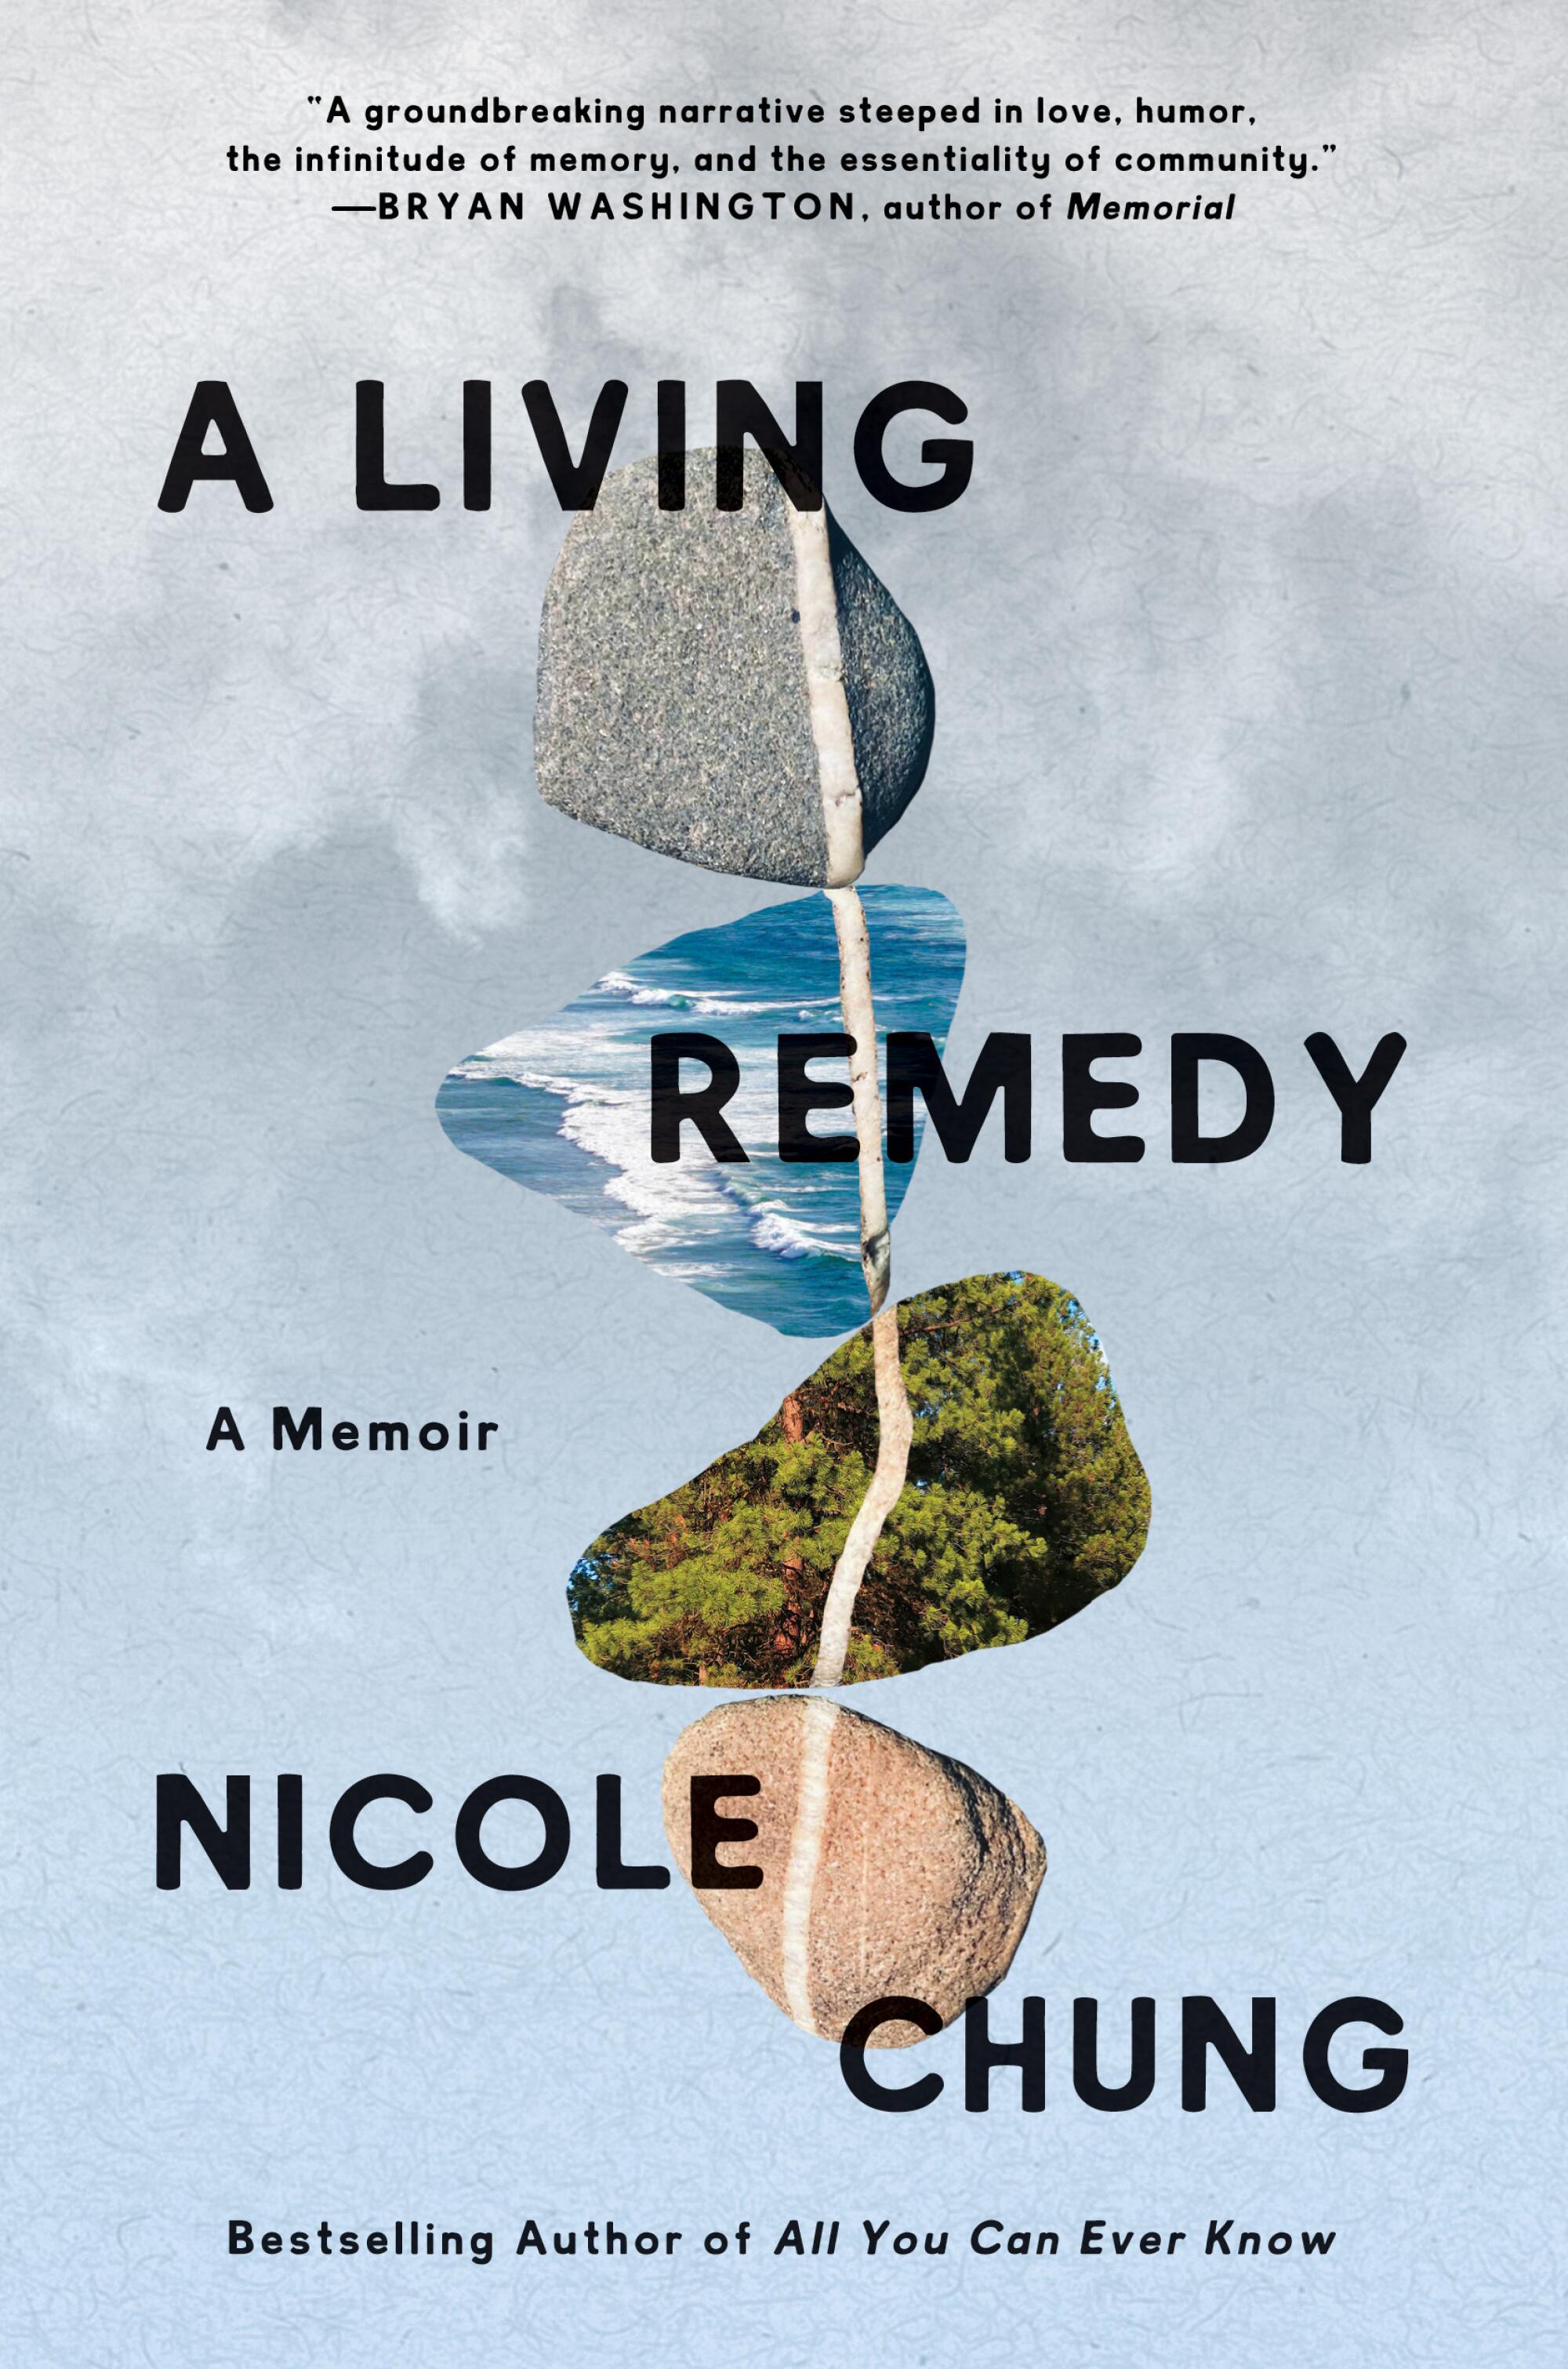 Book cover of "A Living Memory" by Nicole Chung